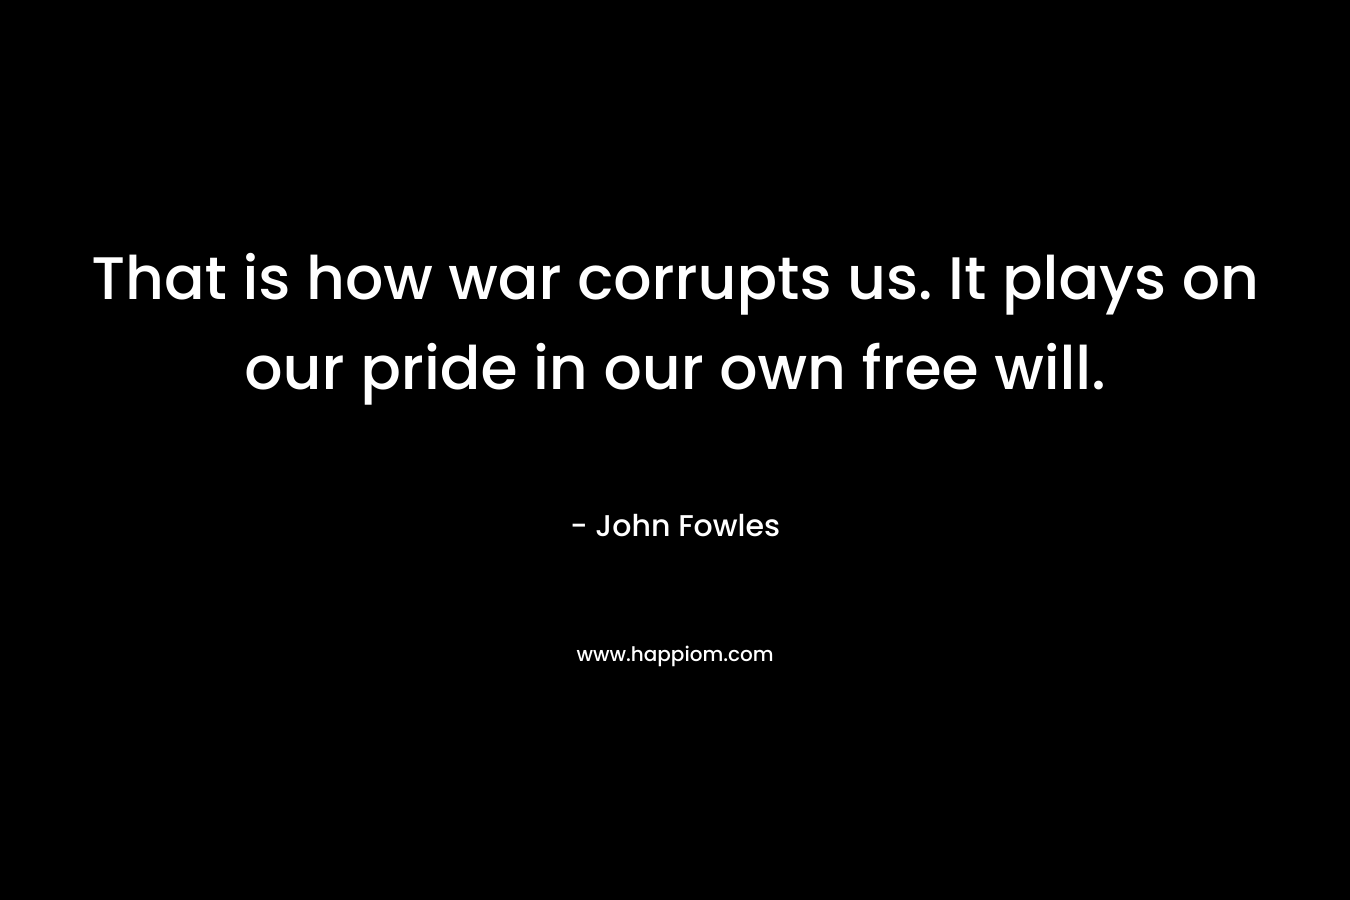 That is how war corrupts us. It plays on our pride in our own free will.